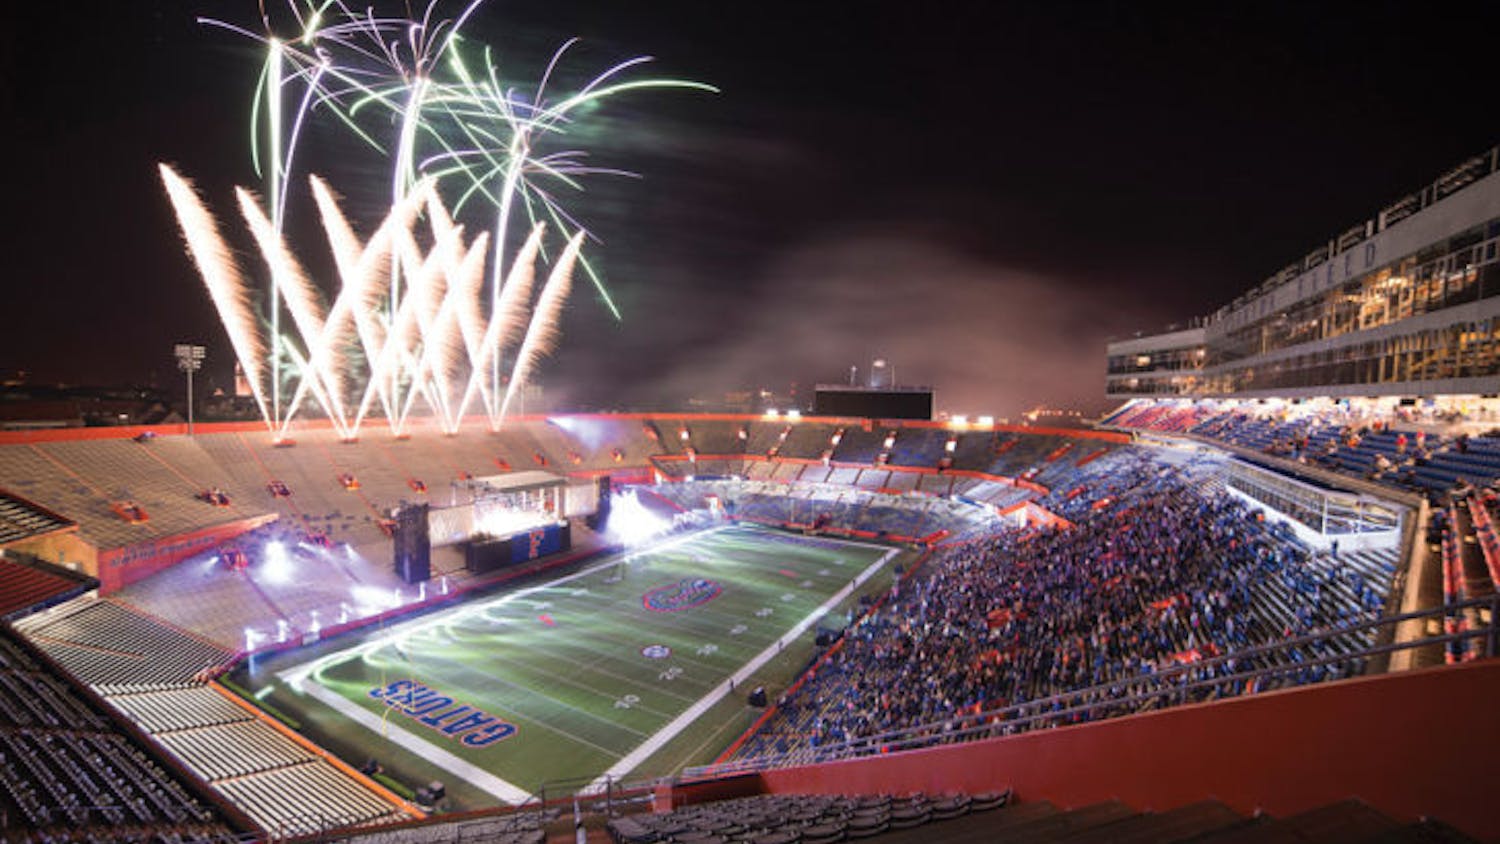 The fireworks finale over Ben Hill Griffin Stadium marks the end of the 90th annual Gator Growl during UF Homecoming Friday evening. The Fray, Sister Hazel and the UF Fightin’ Gator Marching Band performed for students, alumni and guests.